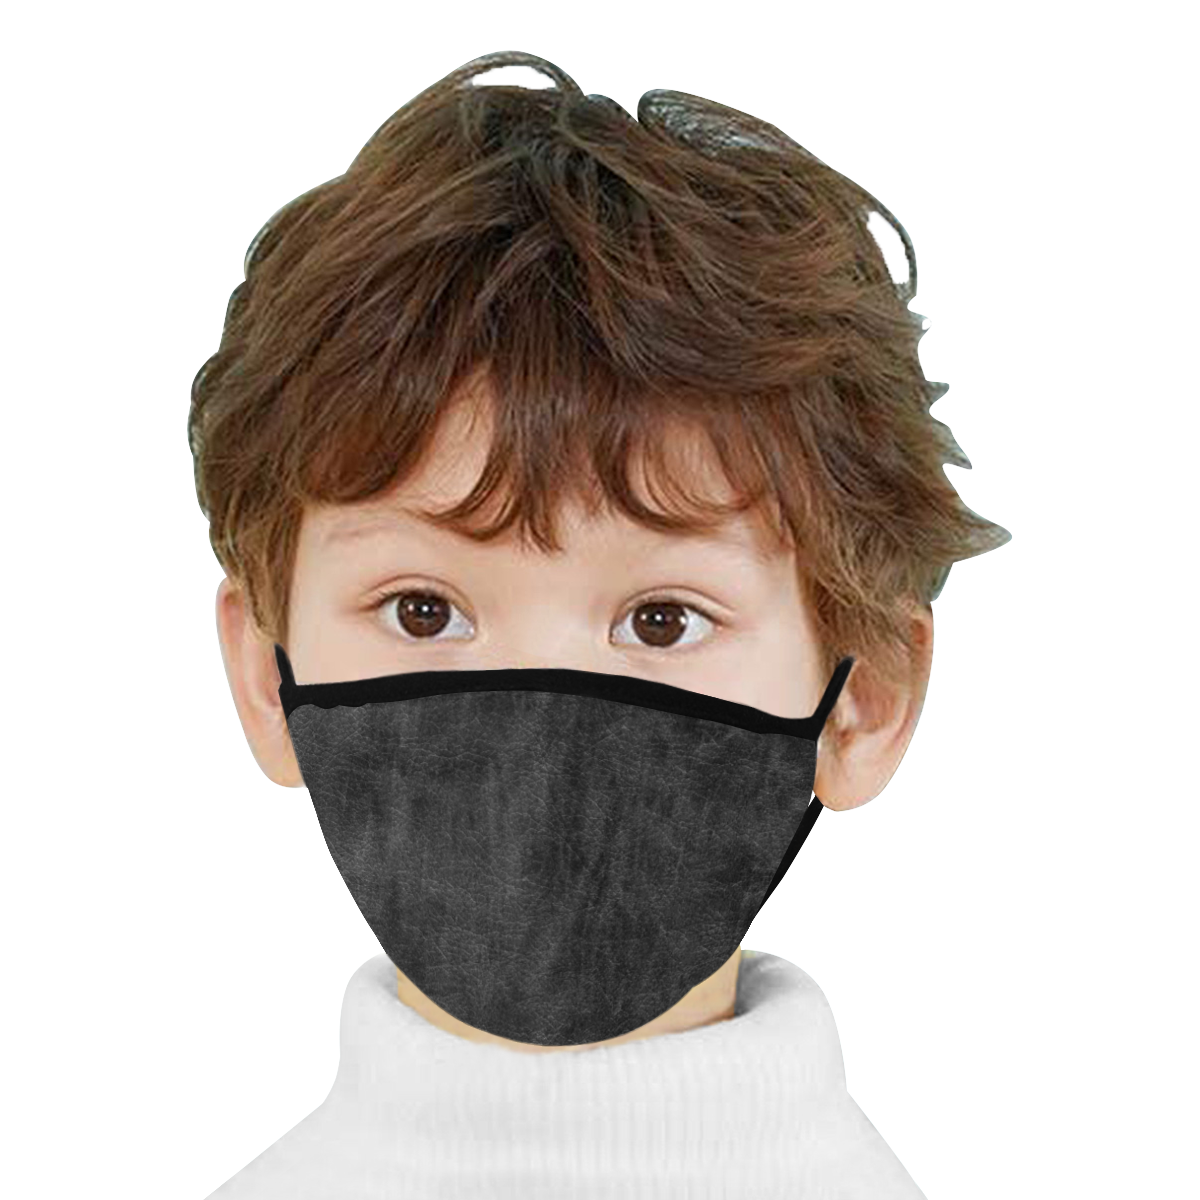 LEATHER Mouth Mask (30 Filters Included) (Non-medical Products)